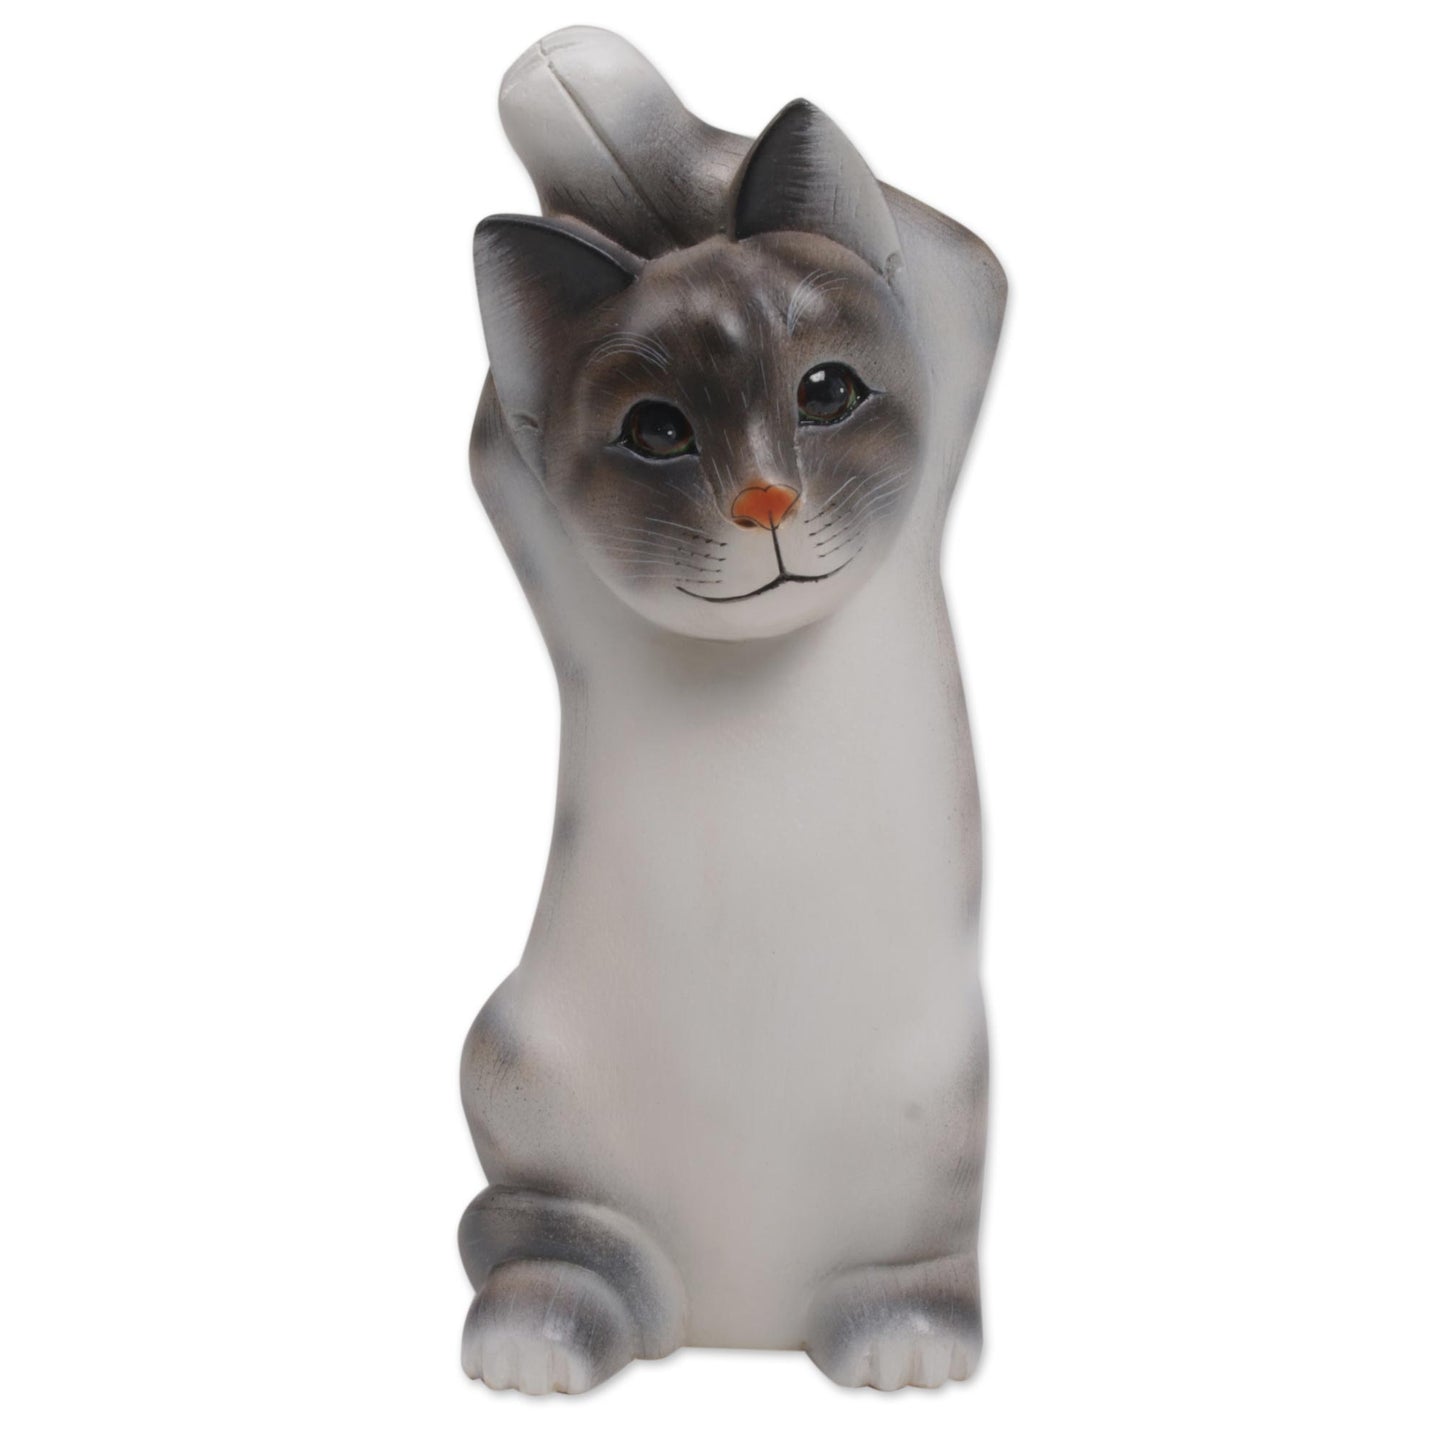 Skyward Paws Whimsical Wood Cat Sculpture in Grey and White from Bali